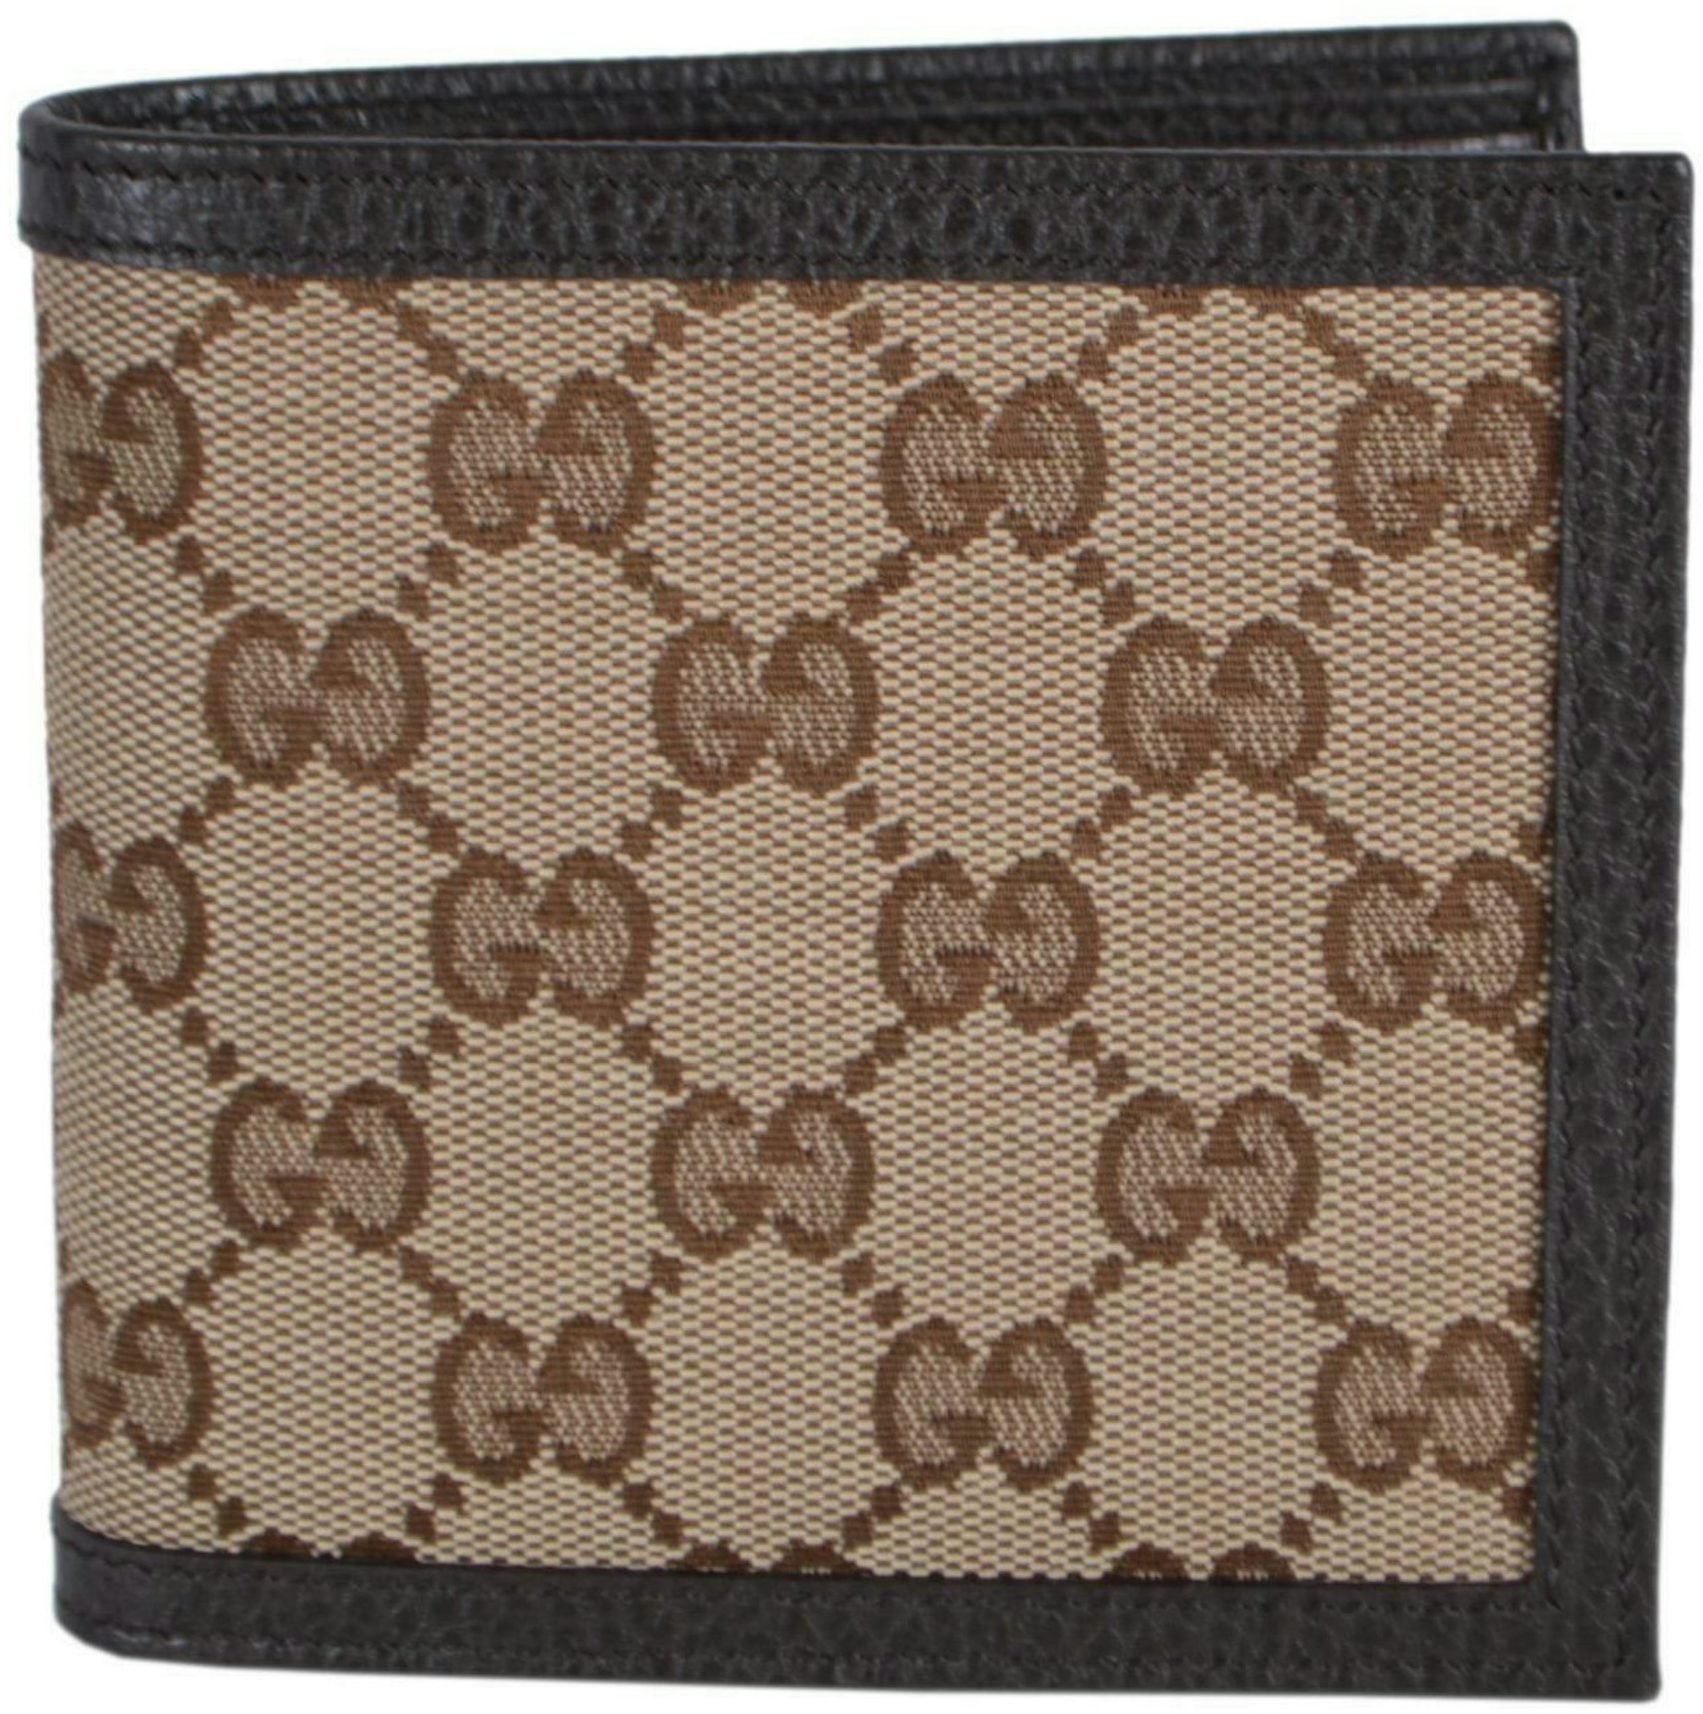 Wallet with cut-out Interlocking G in beige and ebony Supreme